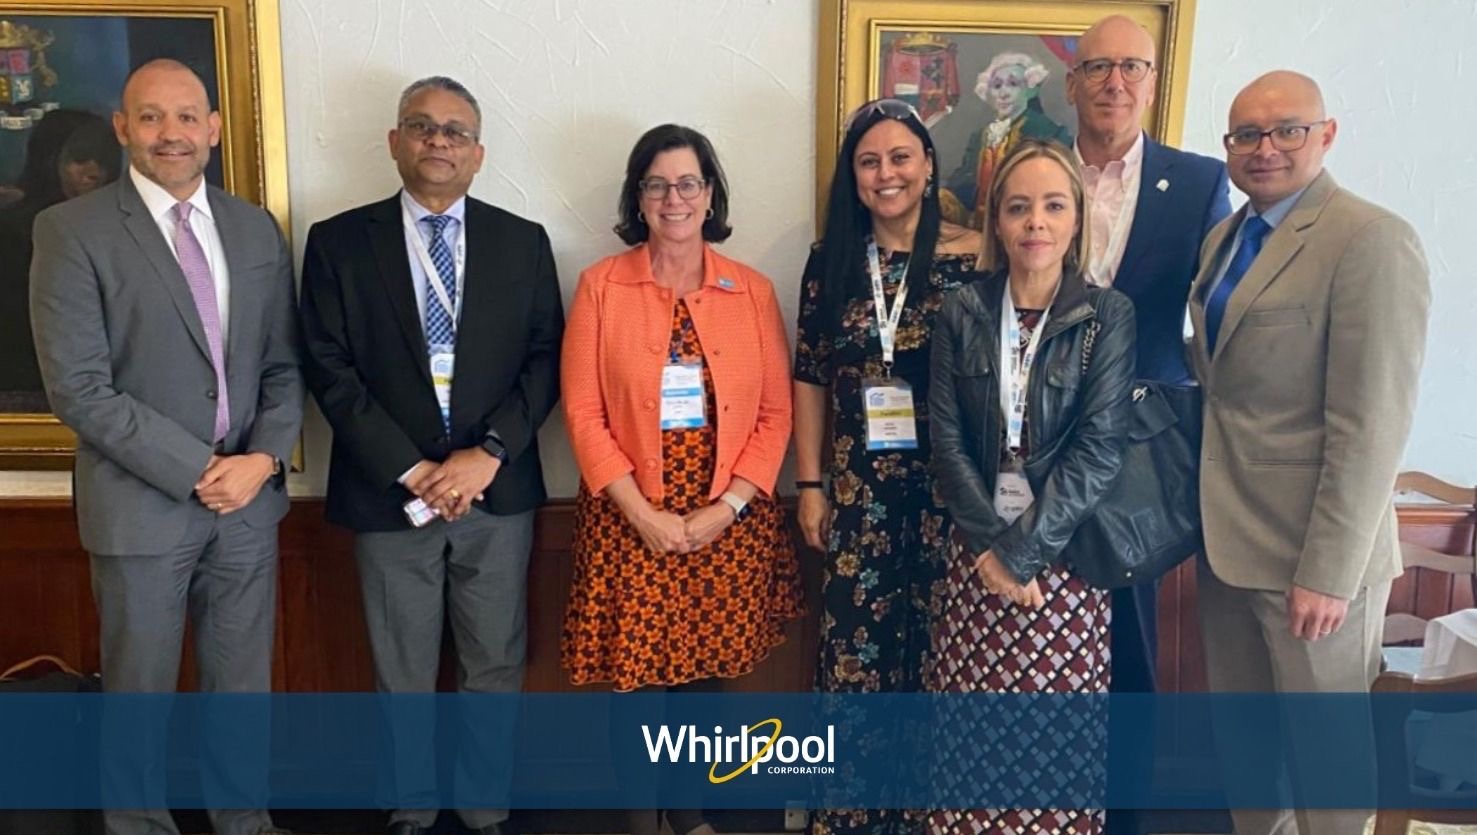 Whirlpool Corporation Sponsored Global Housing Forum in Bogota, Colombia with Focus on Climate and Social Crises 1